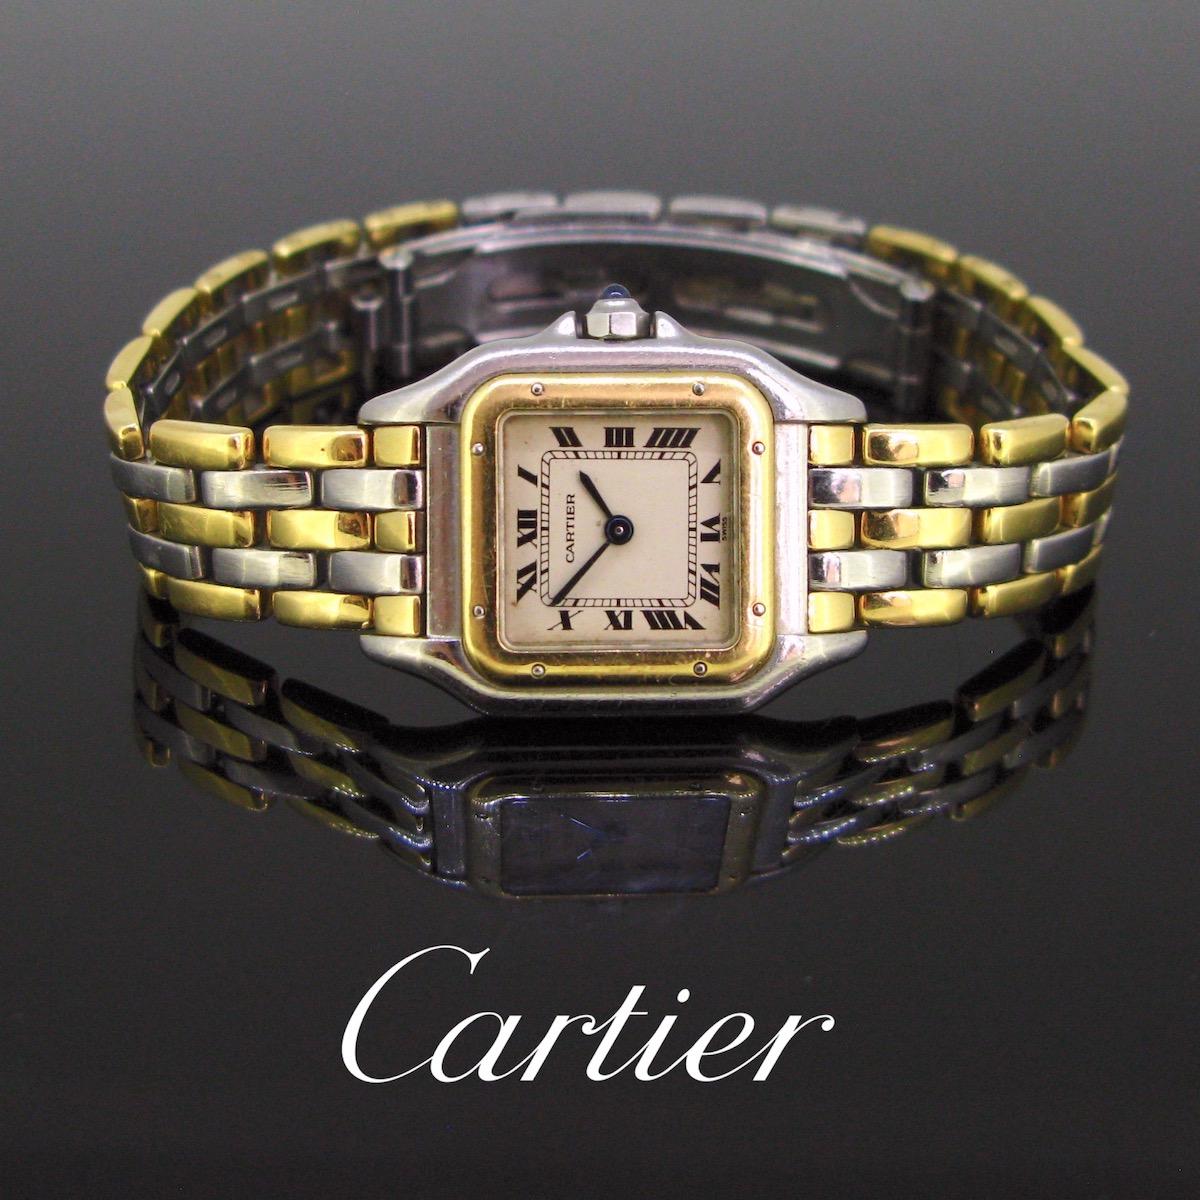 This Panthere Cartier small model watch is made in 18k yellow gold and steel. It is in very good condition and has a quartz movement. It works perfectly. It has a double deployant concealed clasp. The Panthere de Cartier timepiece is one of the most